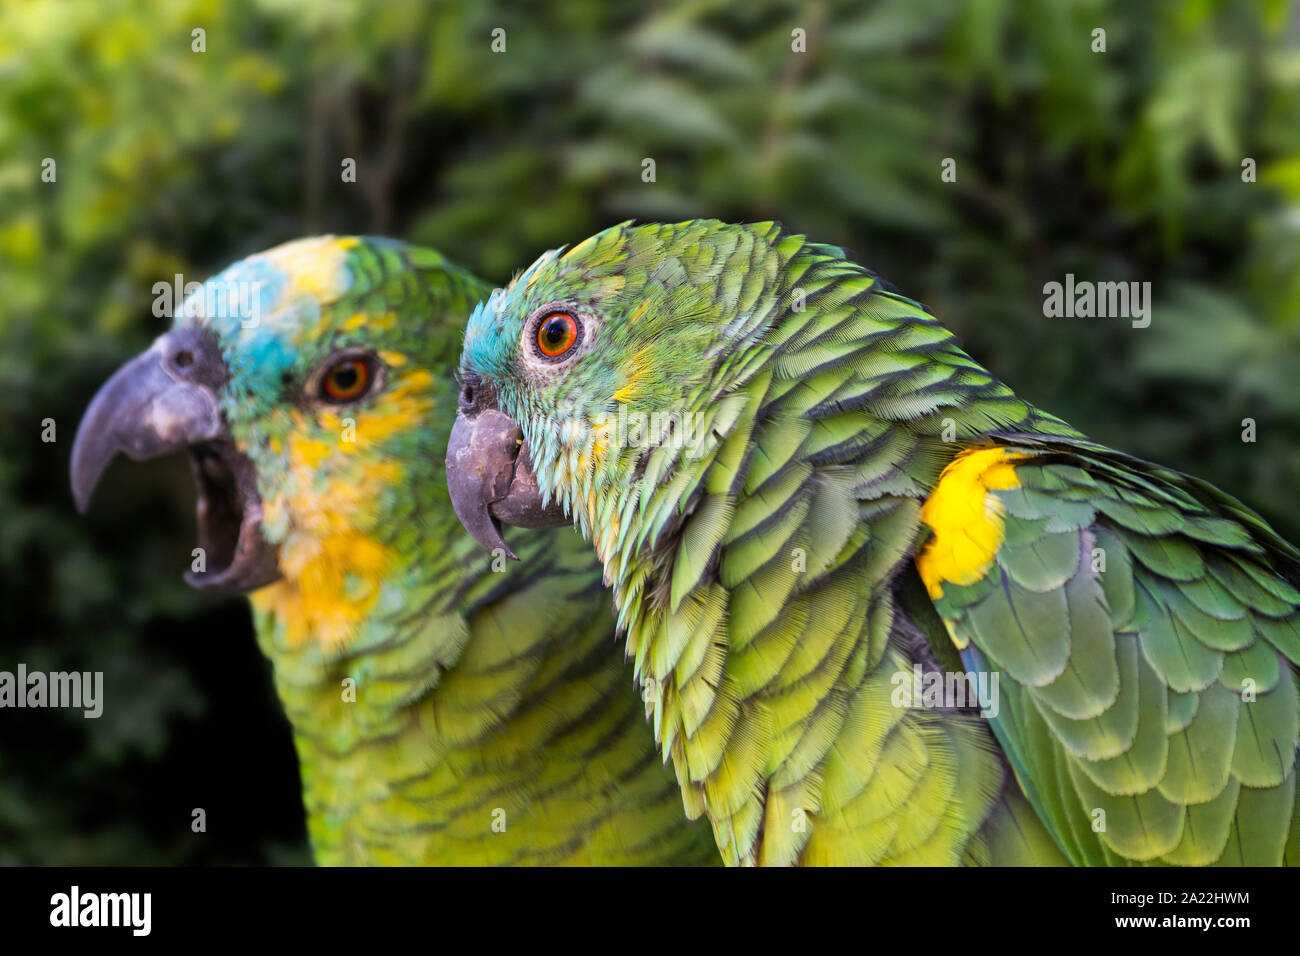 Turquoise-fronted amazon / turquoise-fronted parrot / blue-fronted amazon / blue-fronted parrot (Amazona aestiva xanthopteryx) native to South America Stock Photo